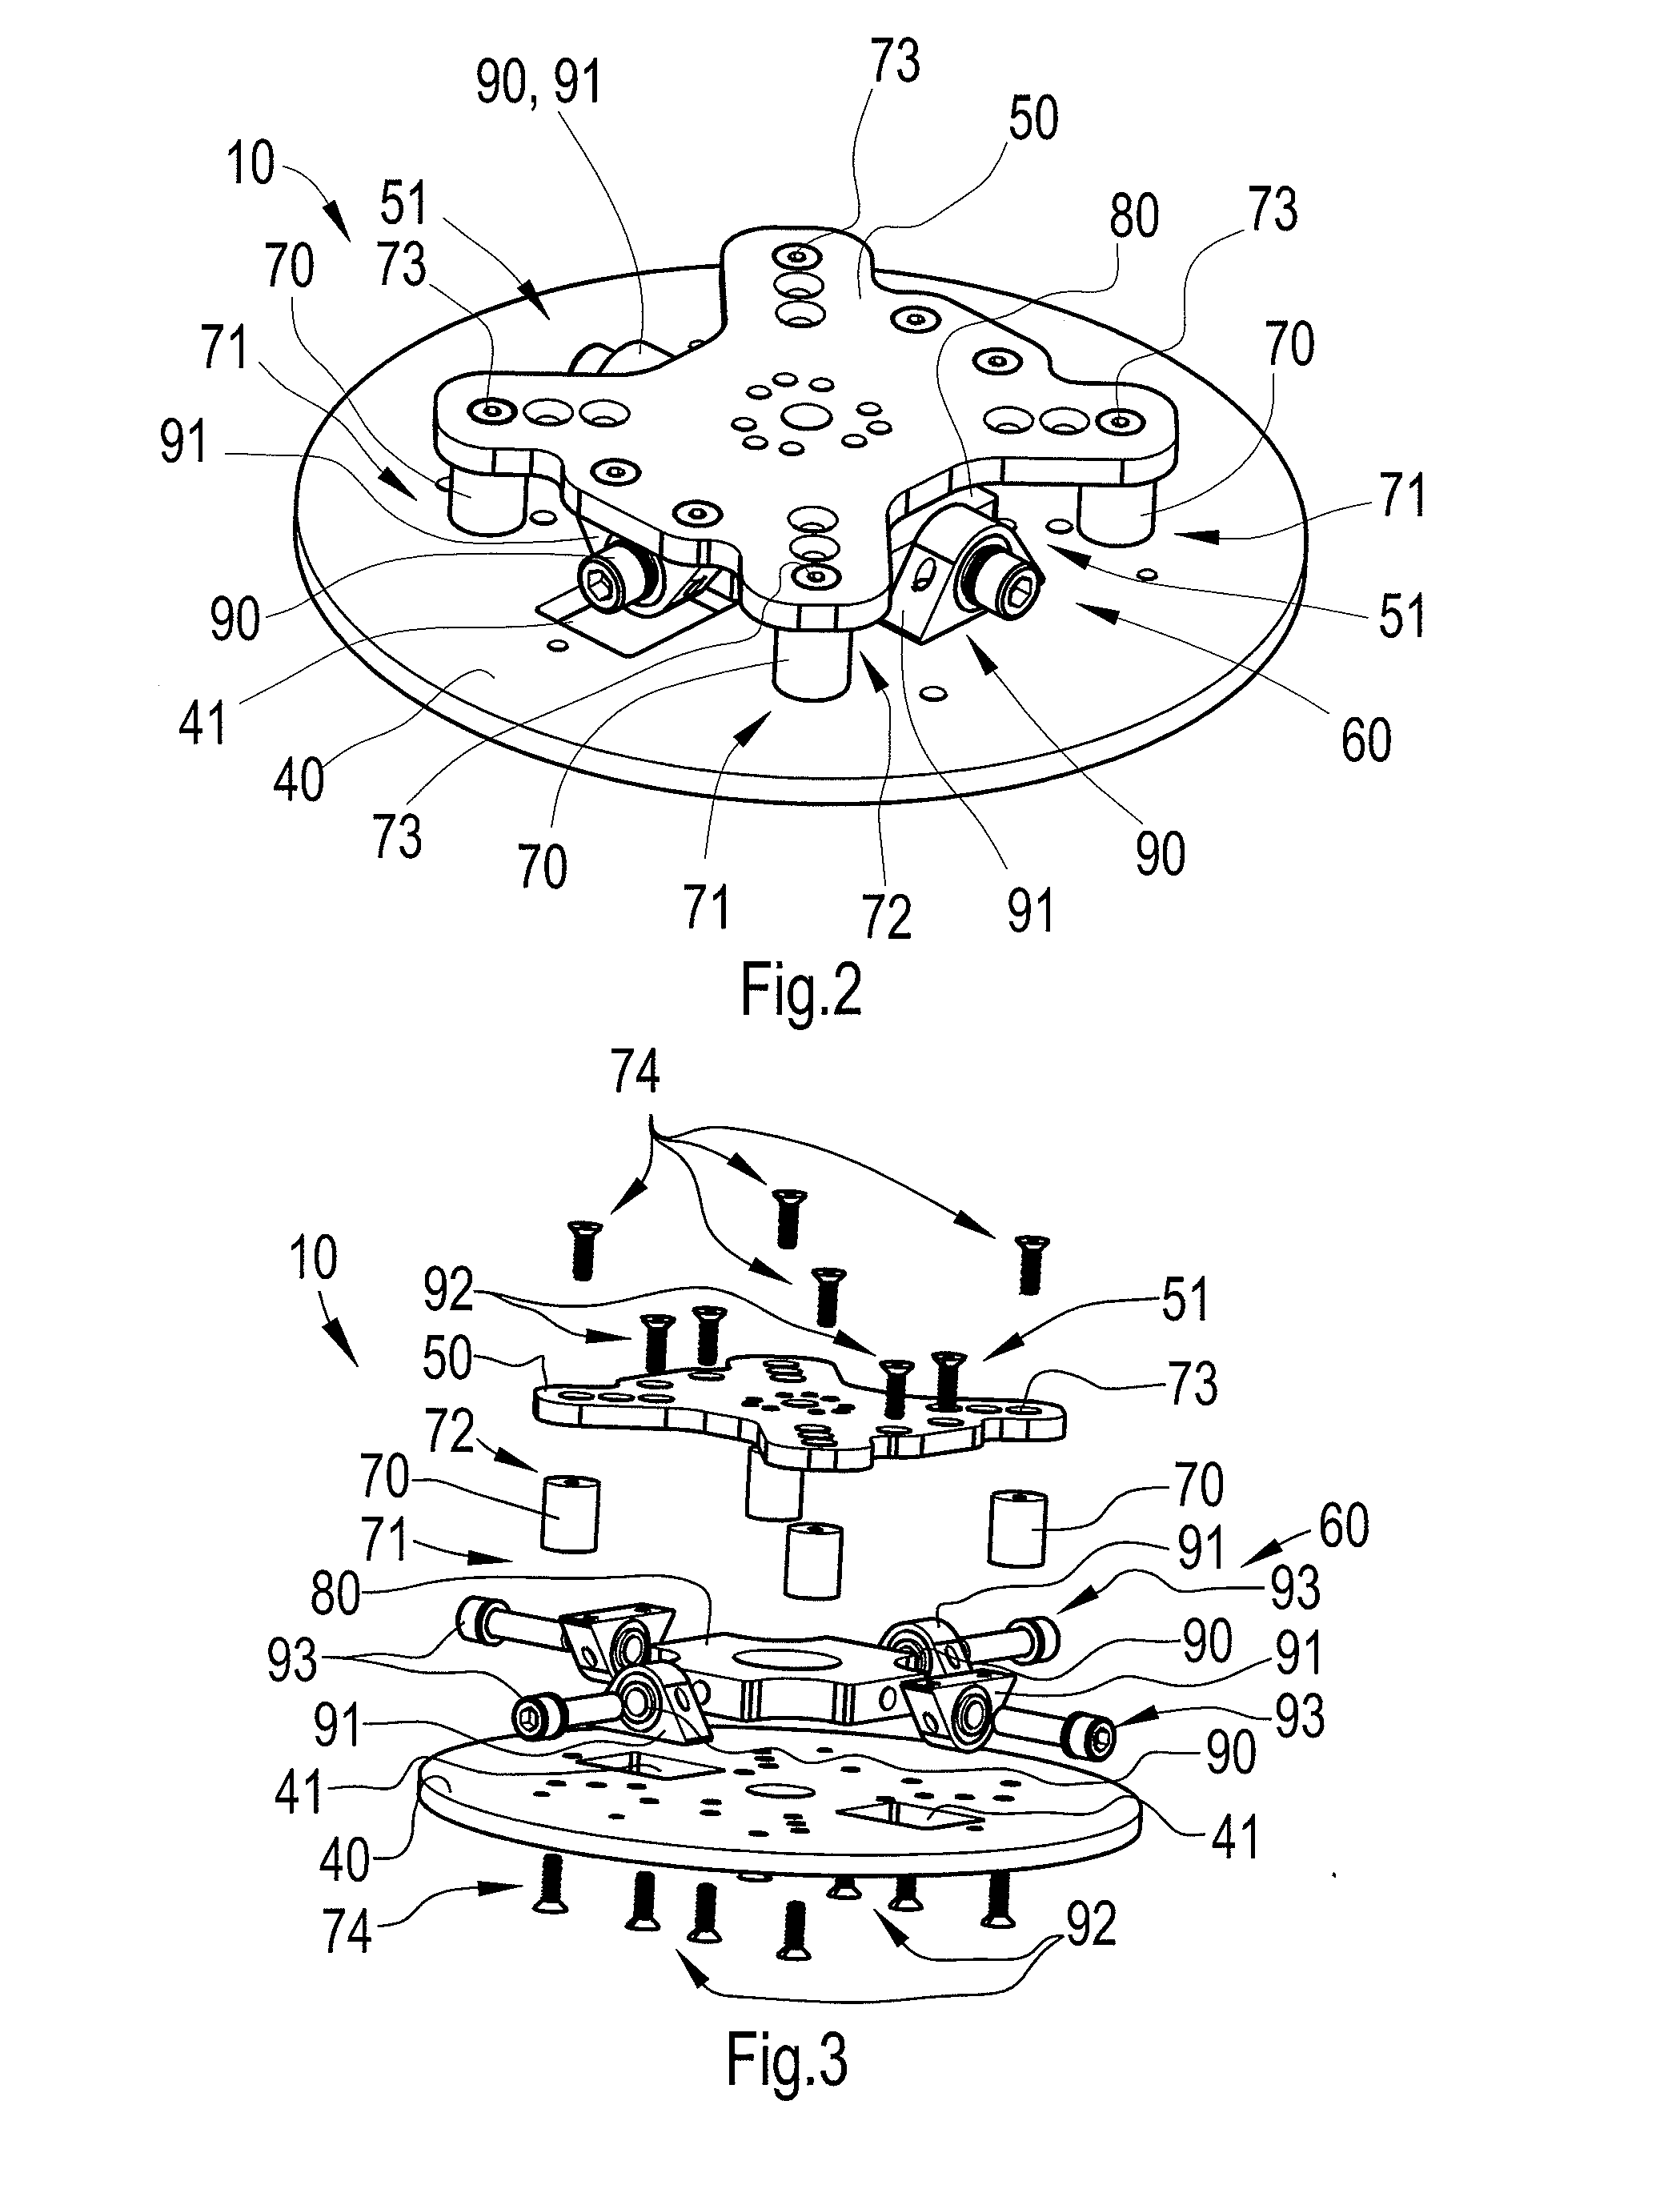 Grinding holder in a machining device